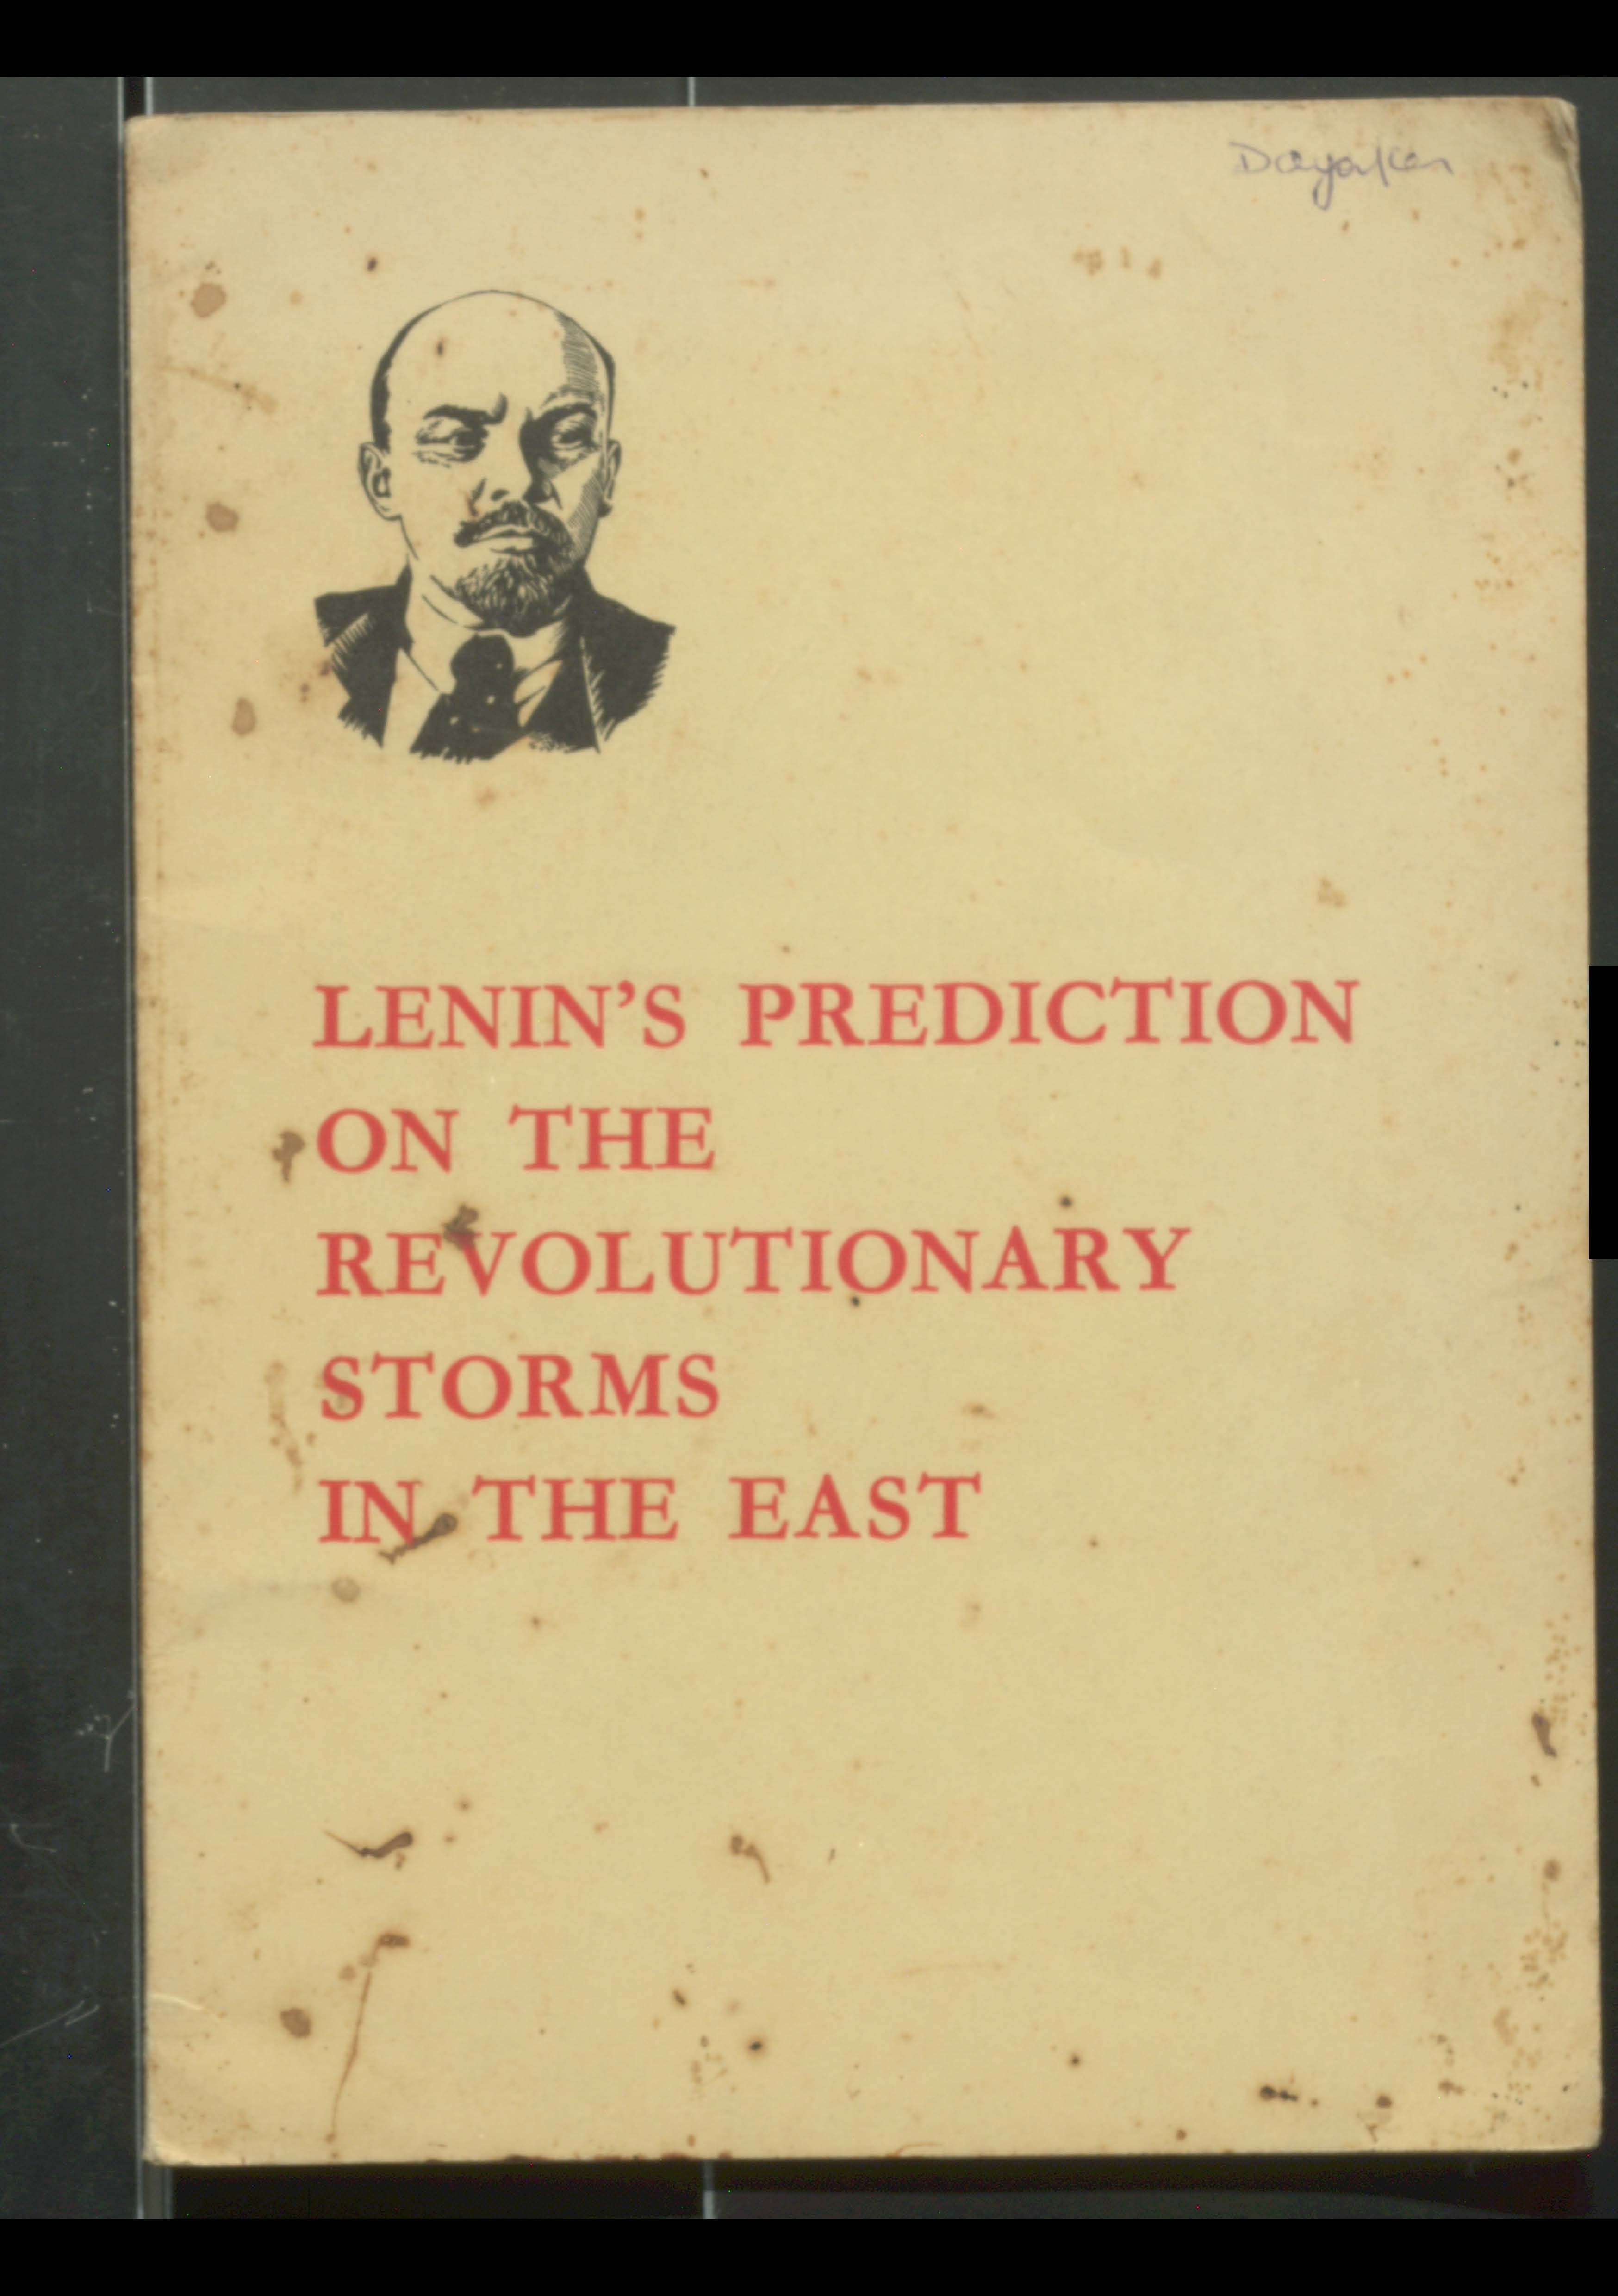 Lenin's Prediction on the Revolutionary storms in the East